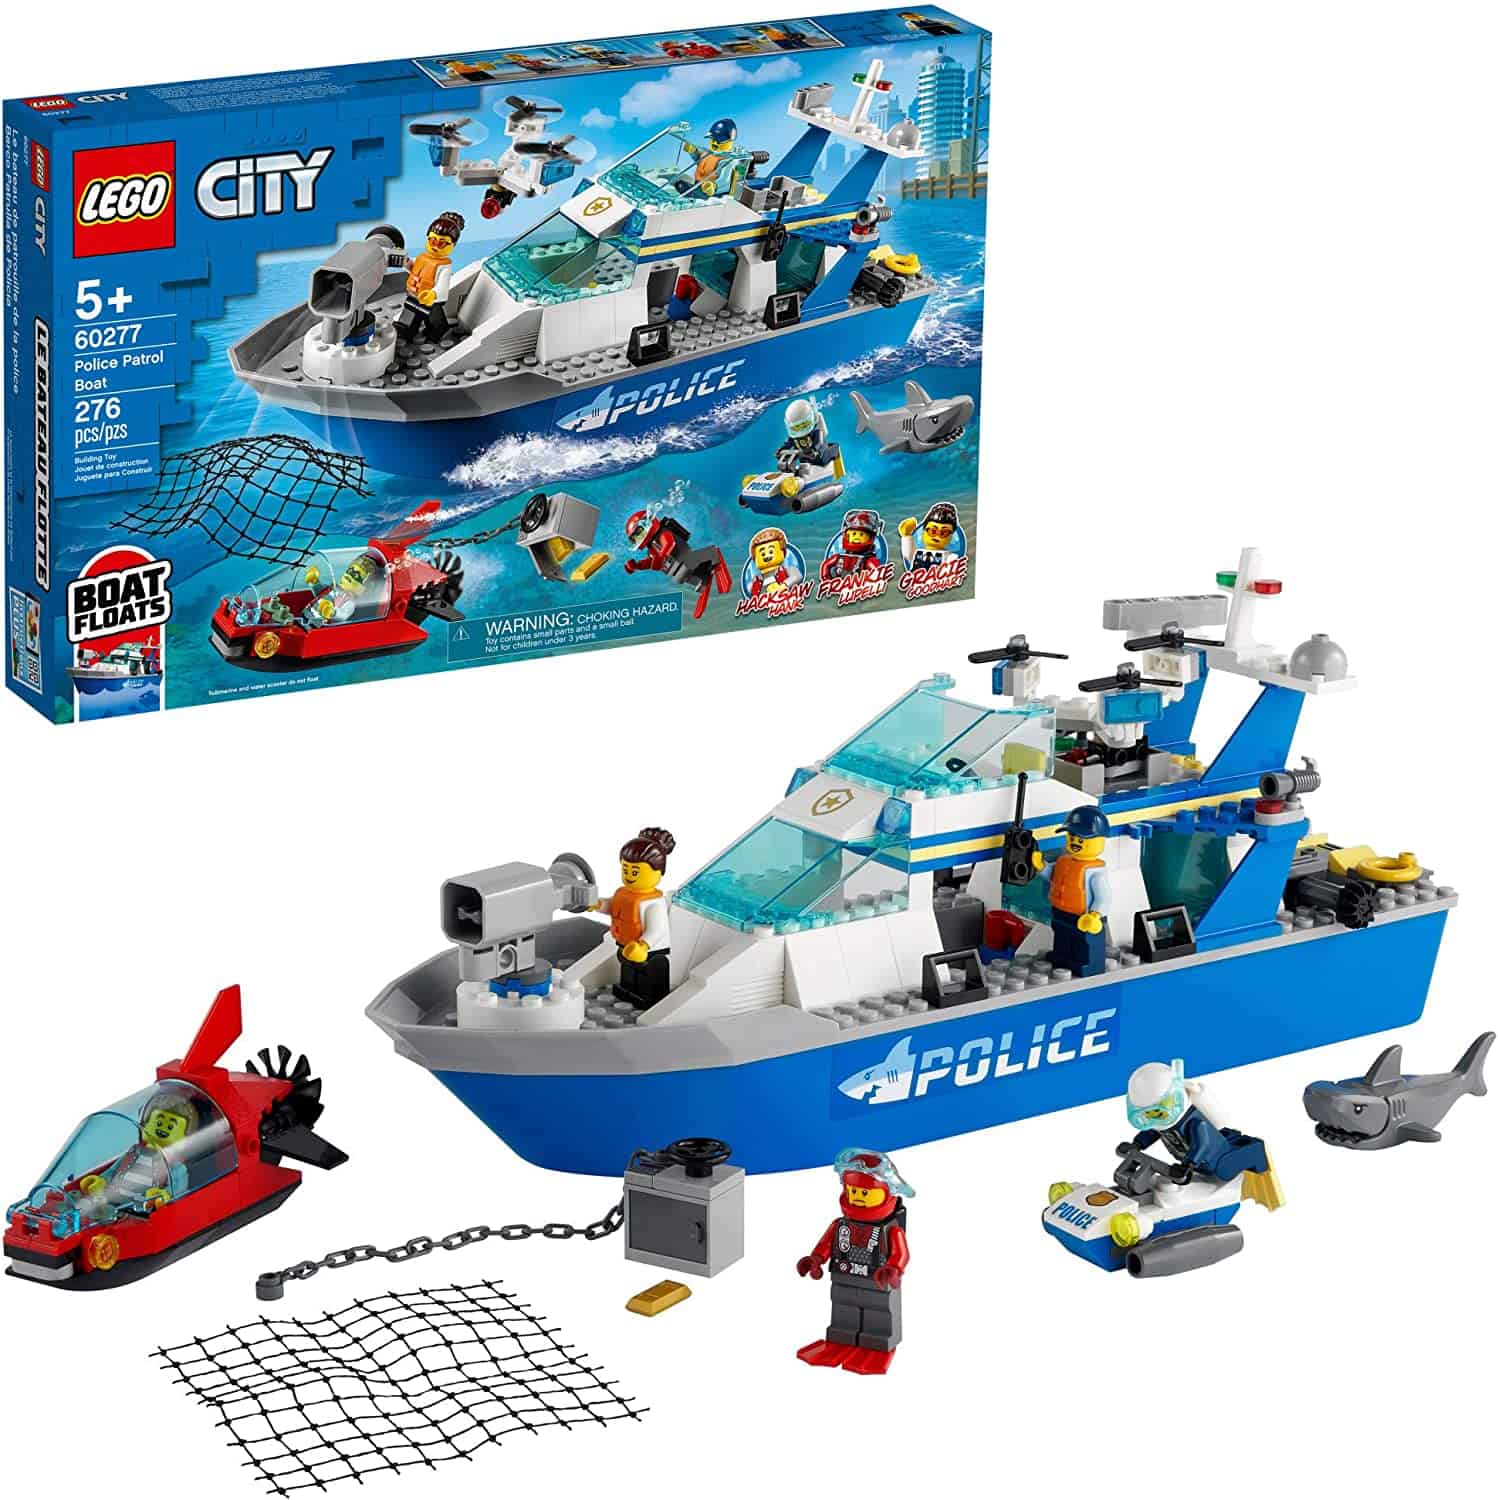 LEGO City Police Patrol Boat Building Kit (276 Pieces) ONLY $49.99 (Reg $60)